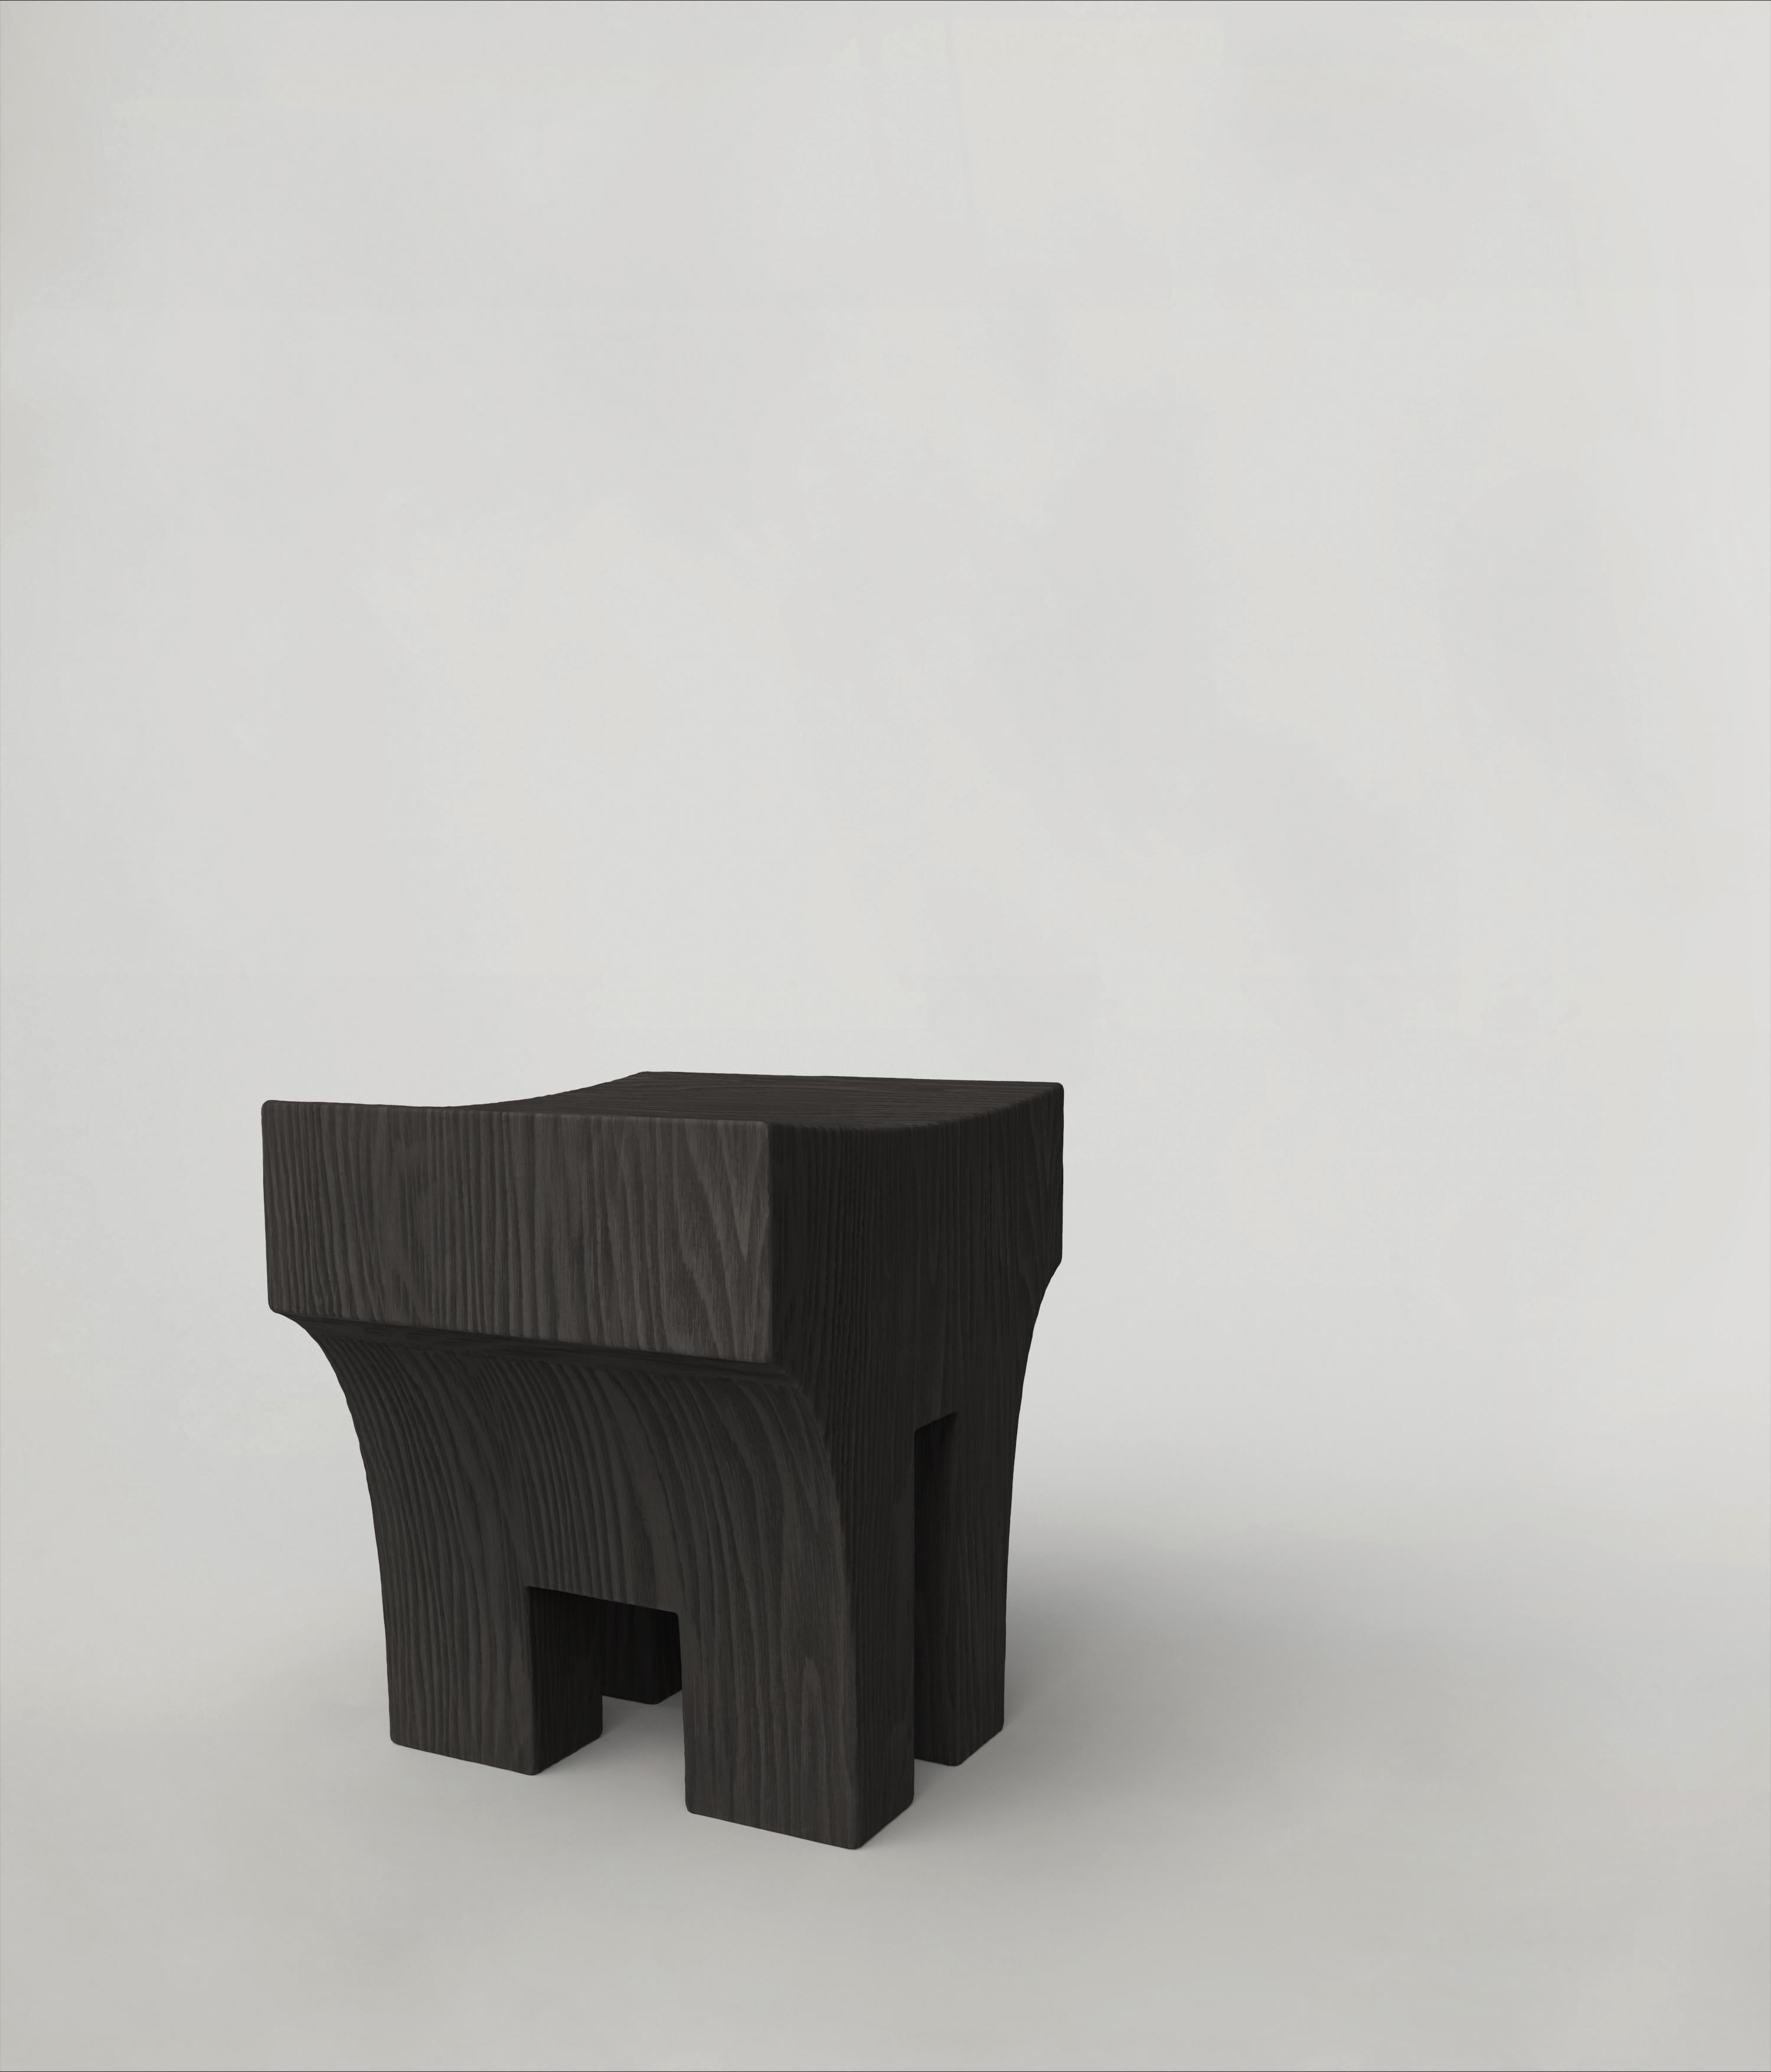 Mhono V1 stool by Edizione Limitata
Limited edition of 150 pieces. Signed and numbered.
Dimensions: D40x W35 x H43 cm
Materials: charred cedar wood

This contemporary collection is a product of Italian craftmanship, starting entirely from